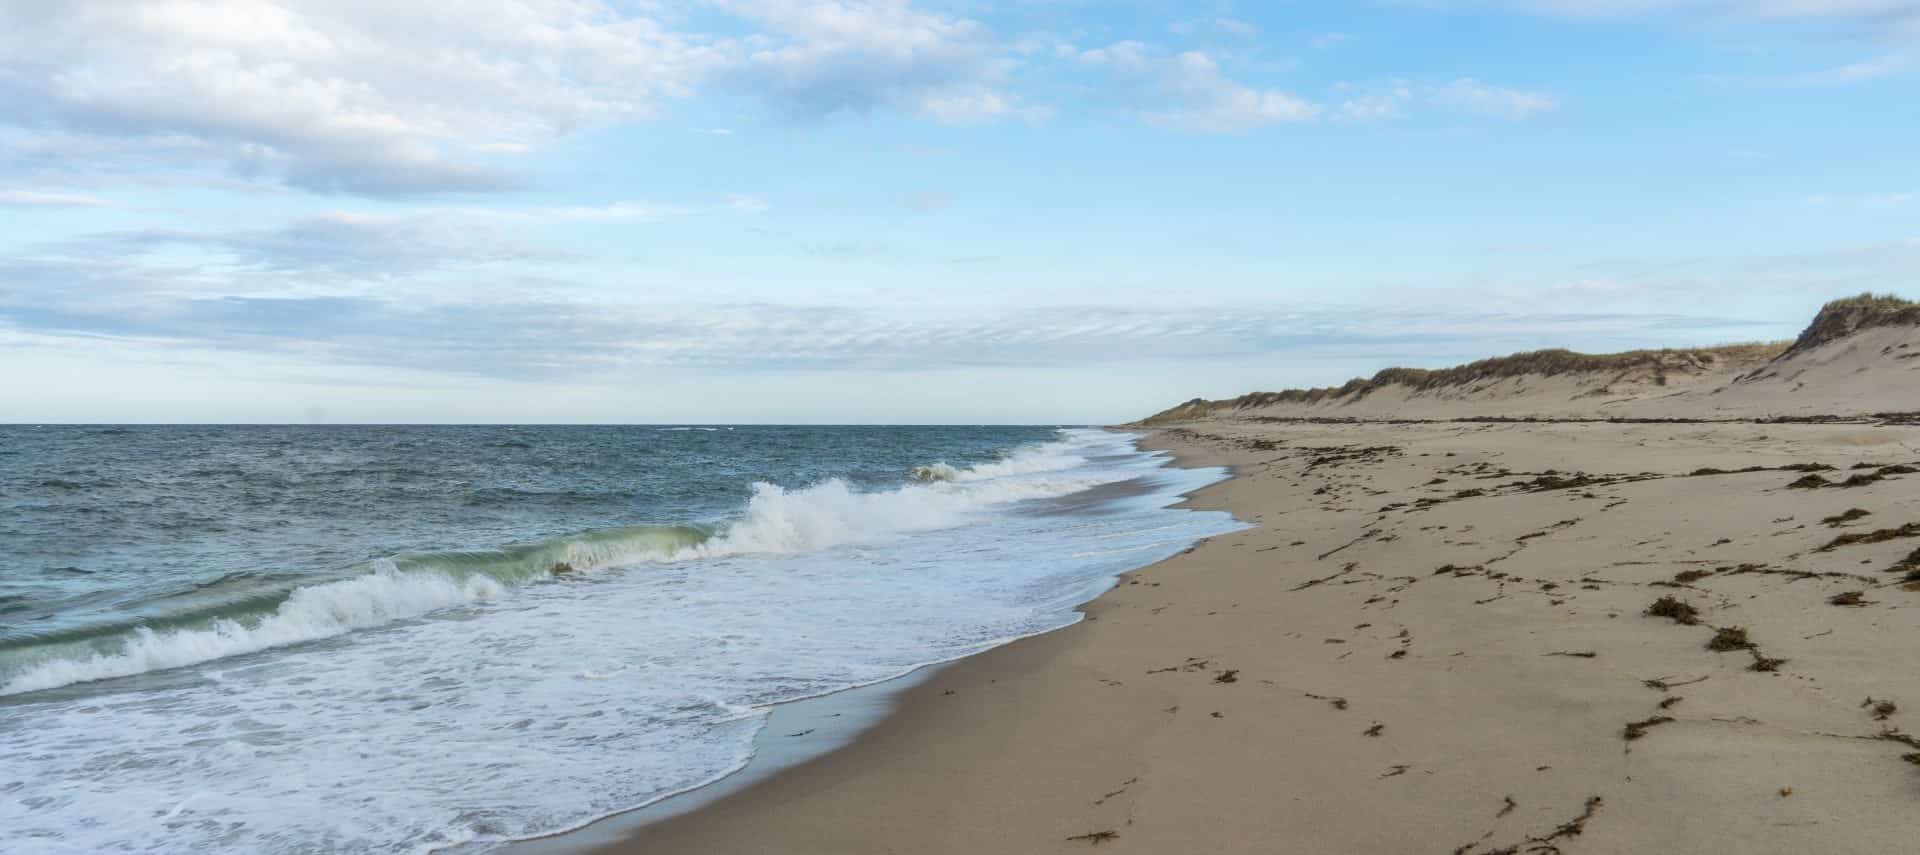 View of a sandy beach with dunes next to the ocean with gently rolling waves crashing on the beach